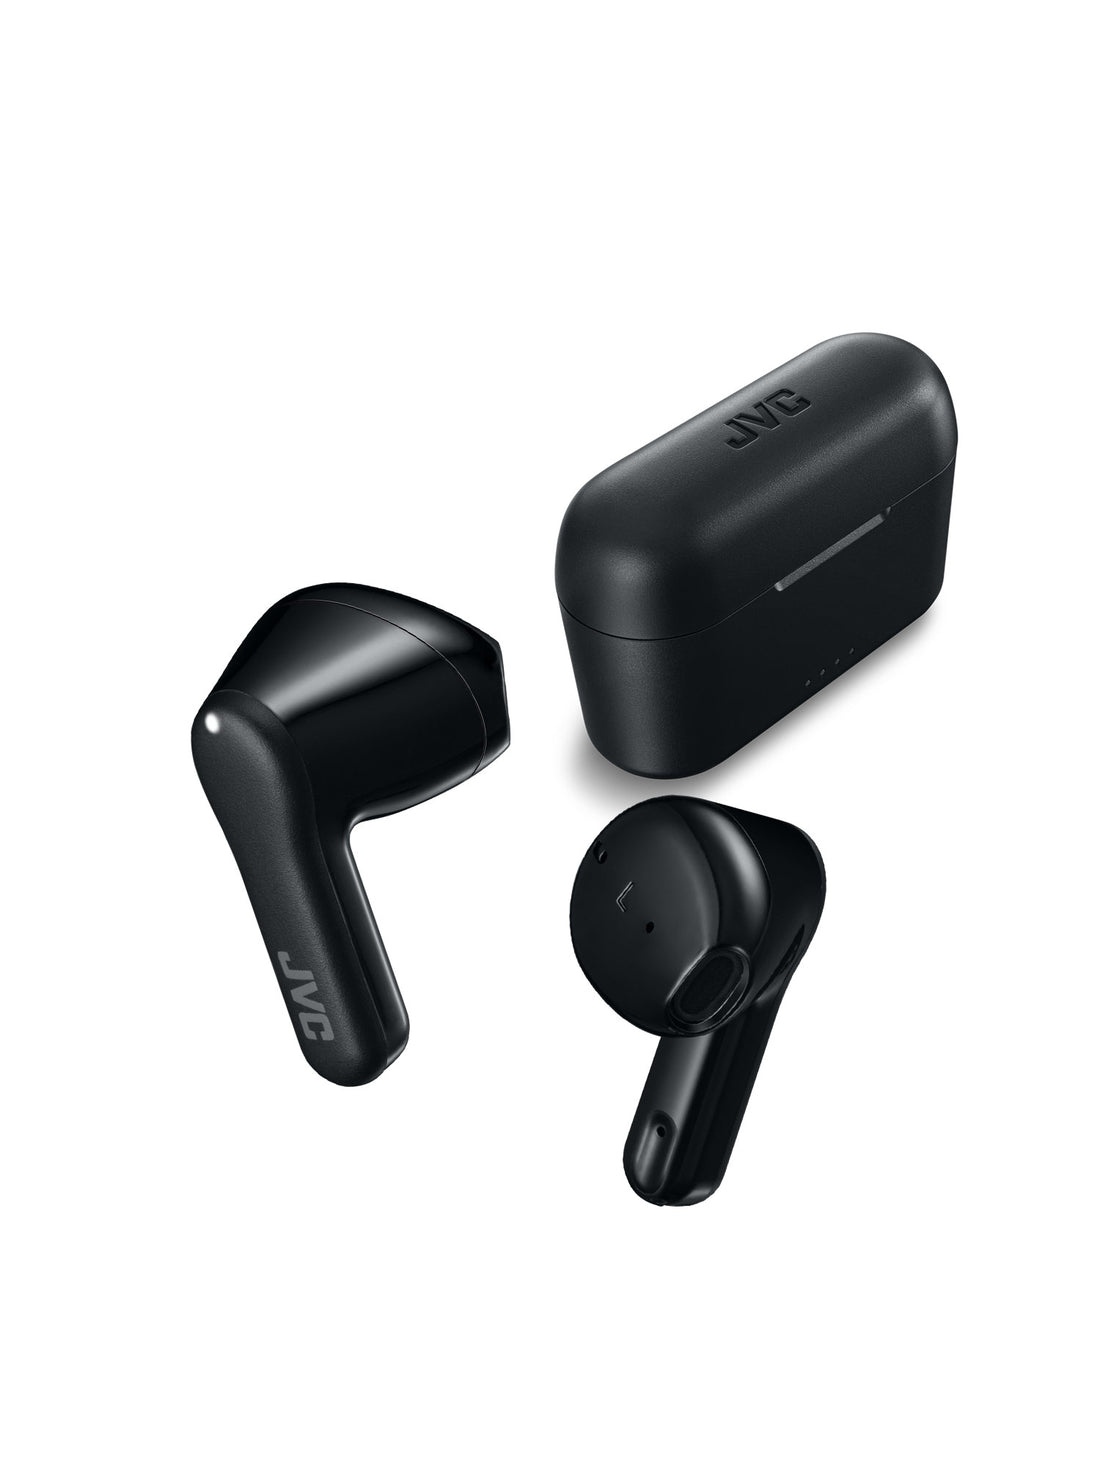 HA-A3T-B in Black open-type earbuds with charging case